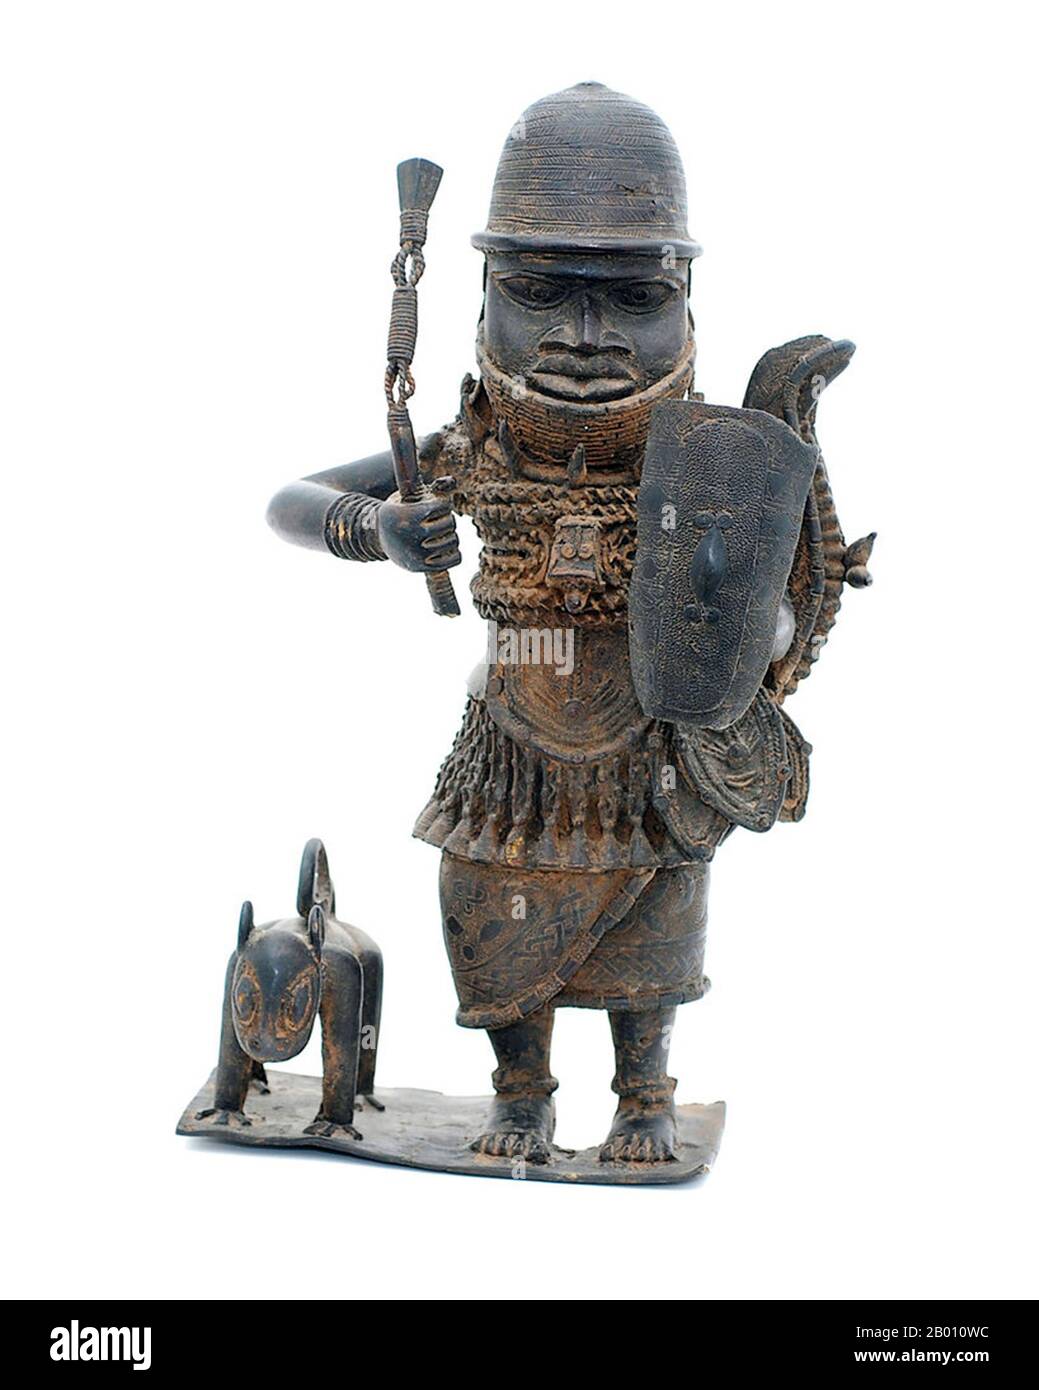 Nigeria: Bronze figurine of an Edo warrior with hunting leopard, from the court of the Benin Kingdom, 16th century.  The Benin Empire (1440–1897) was a pre-colonial African state in what is now modern Nigeria. It is not to be confused with the modern-day country called Benin (and formerly called Dahomey). Stock Photo